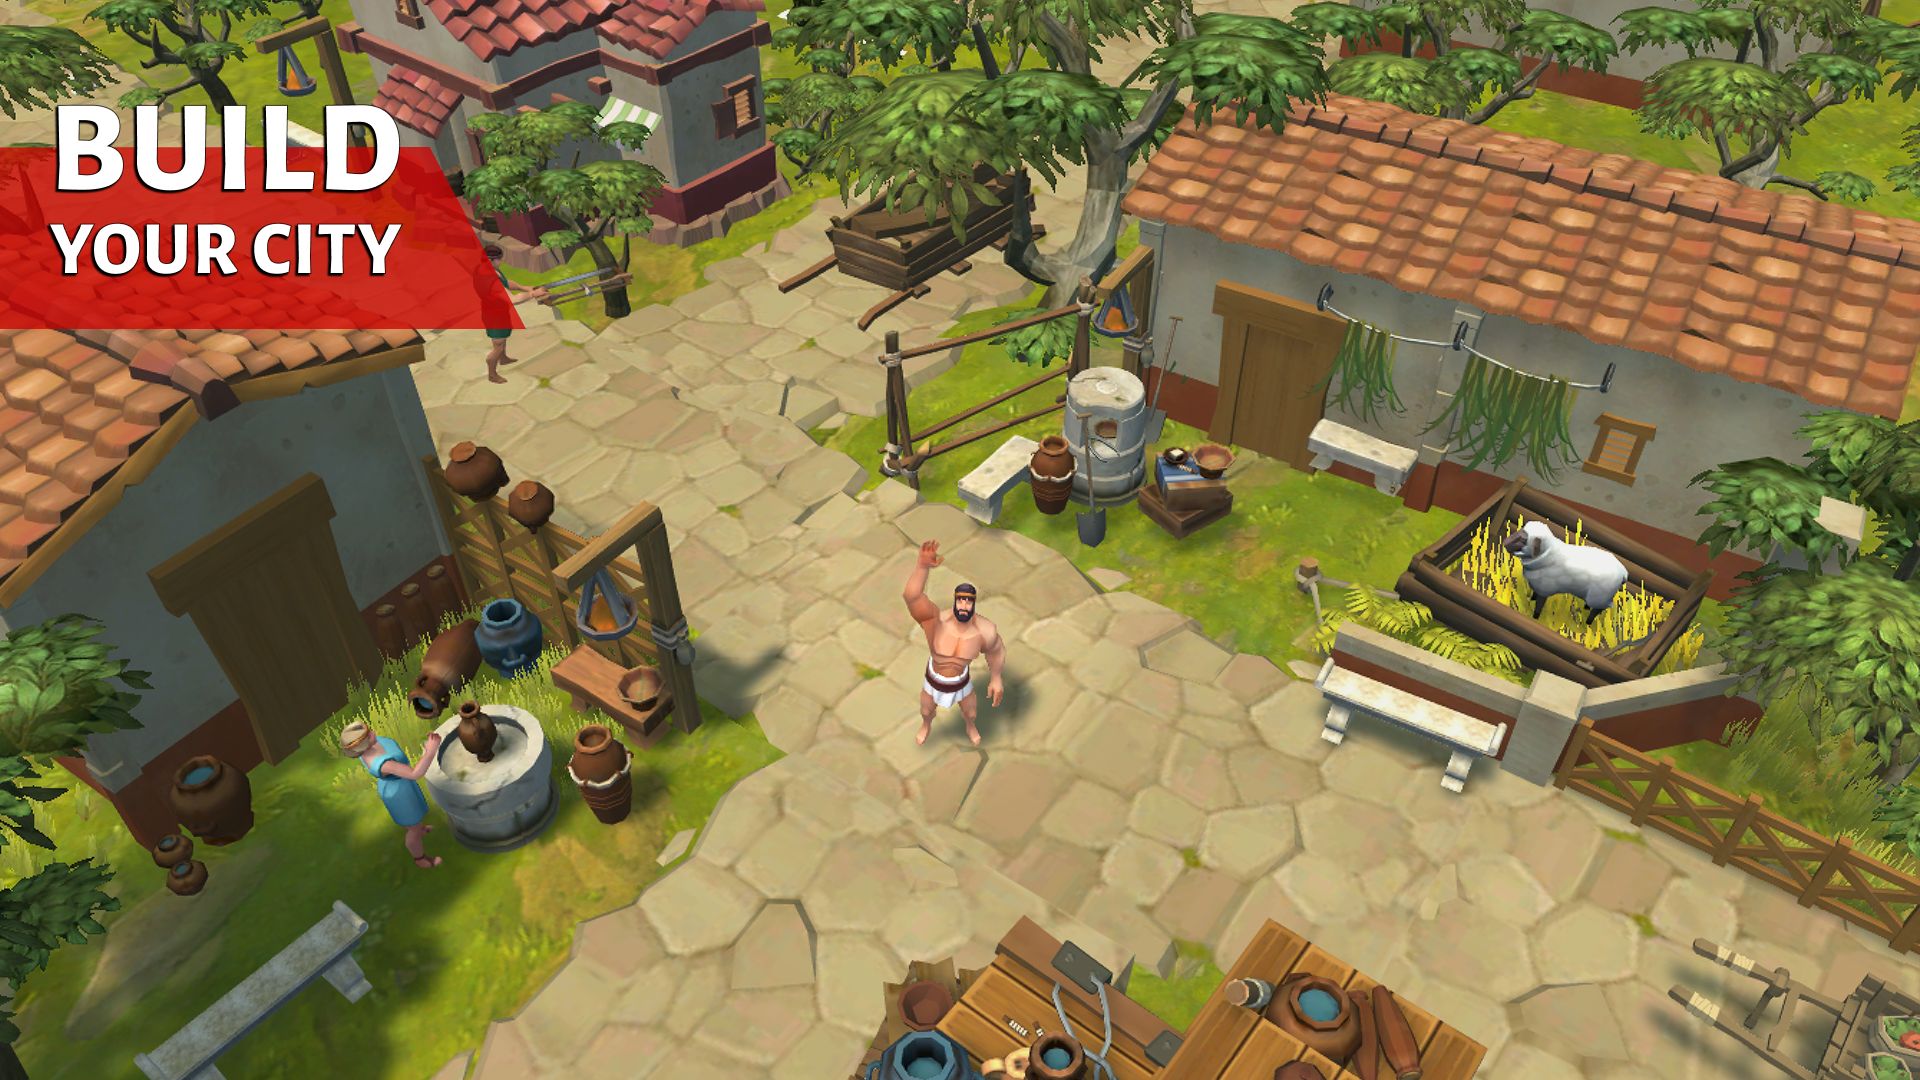 Gladiators: Survival in Rome - Android game screenshots.